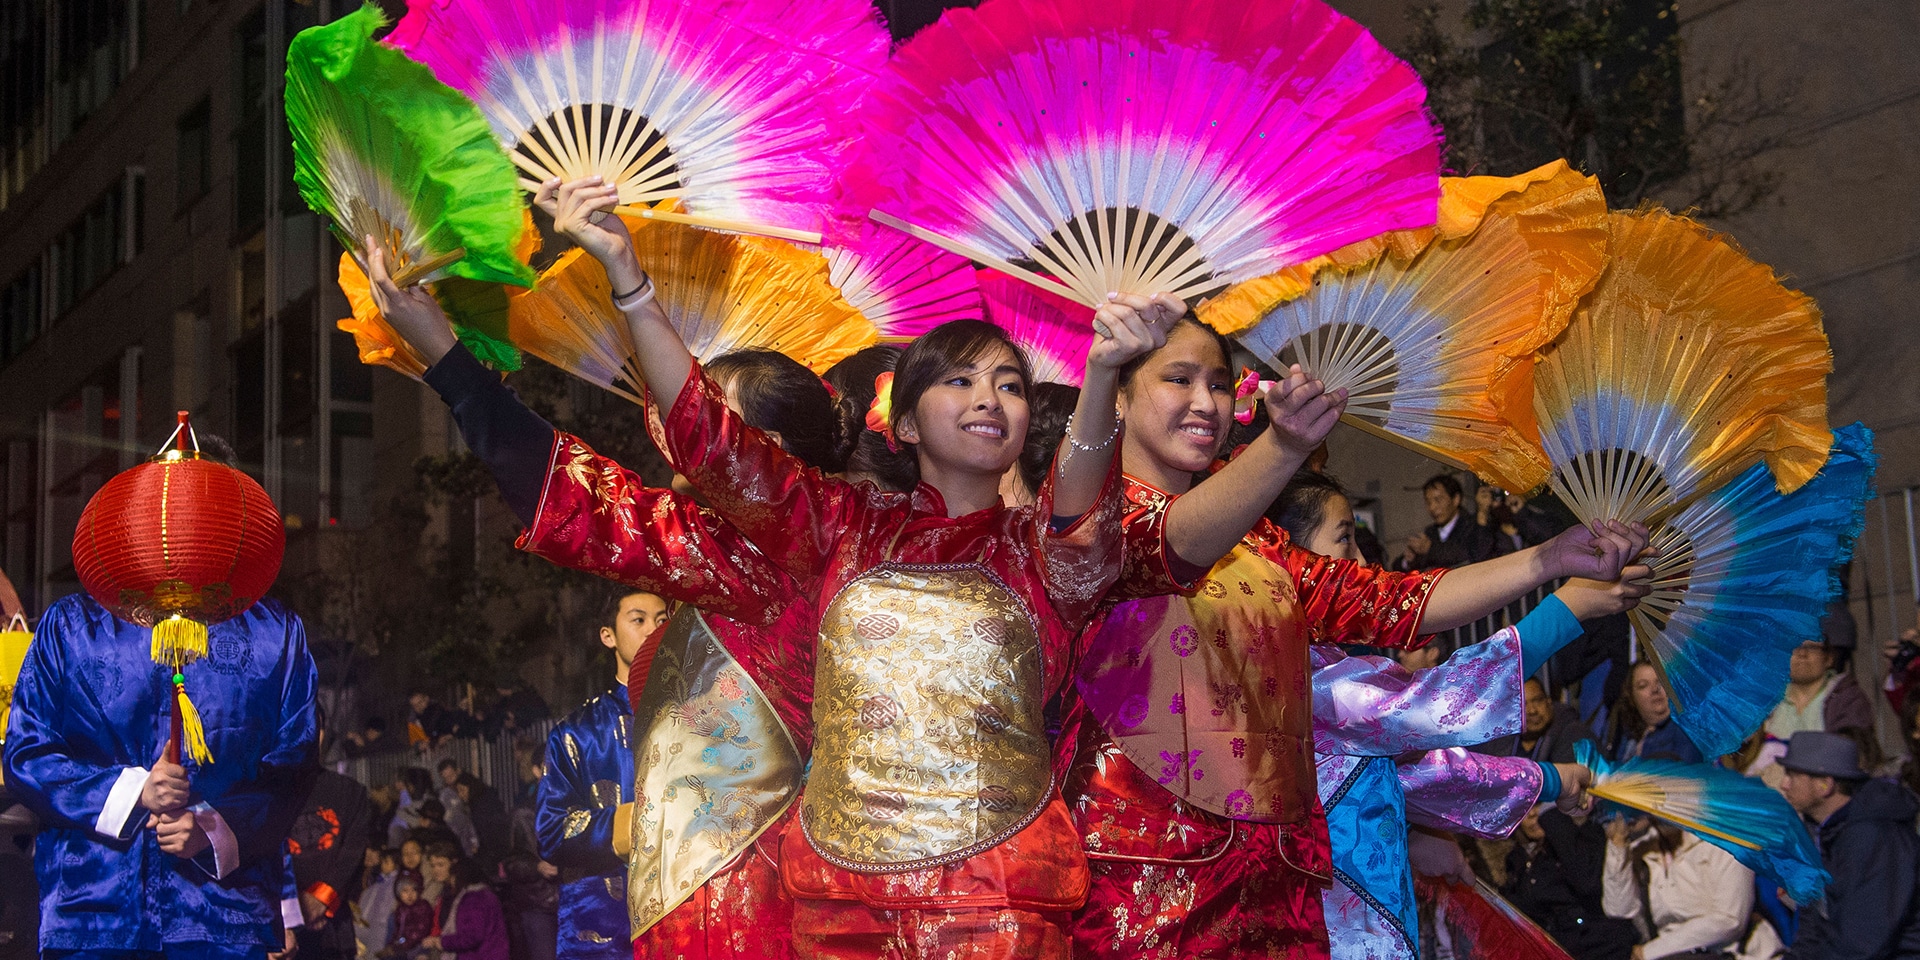 5 Things To Do in Chinatown on Your San Francisco Girls’ Weekend